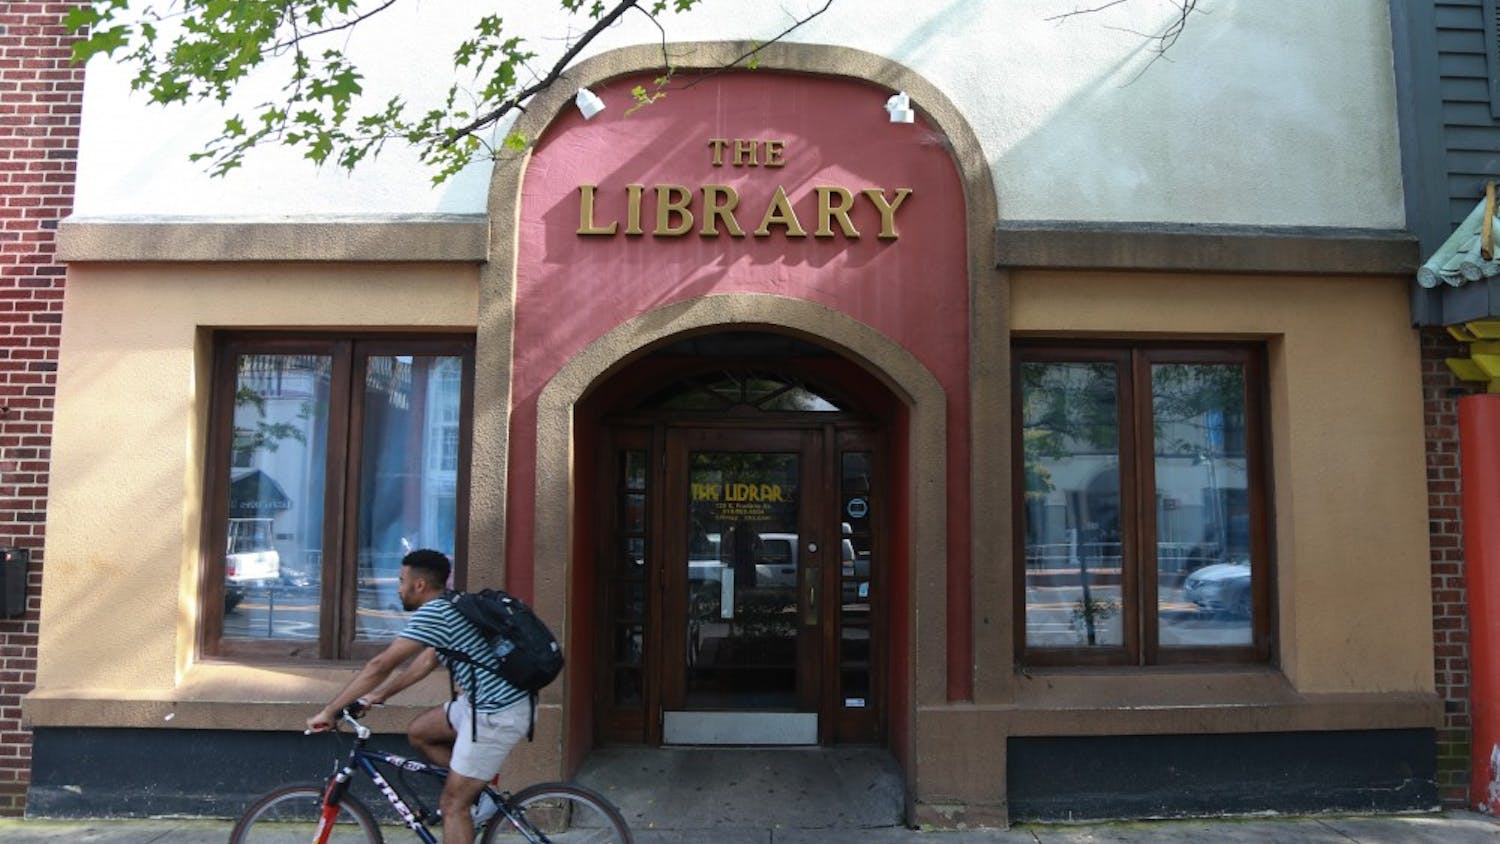 The Library 